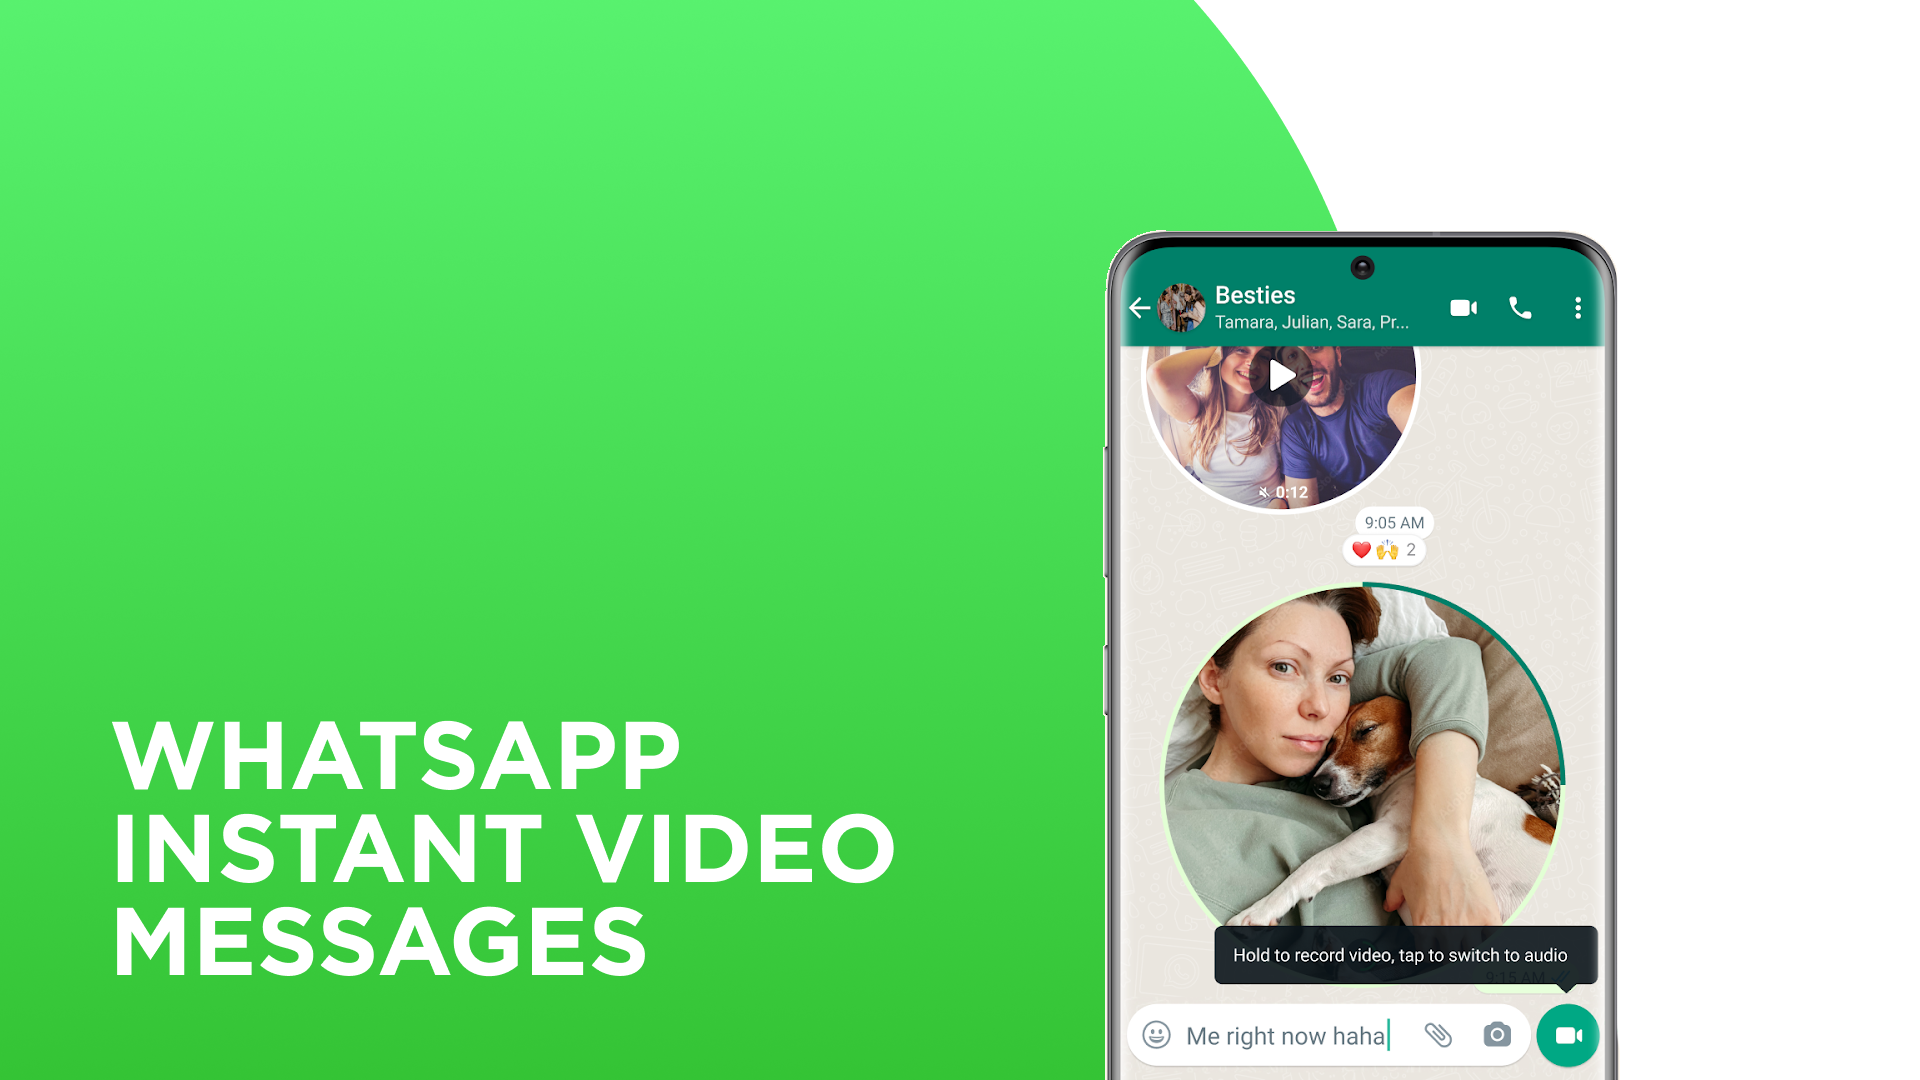 Instant Video Messages on WhatsApp